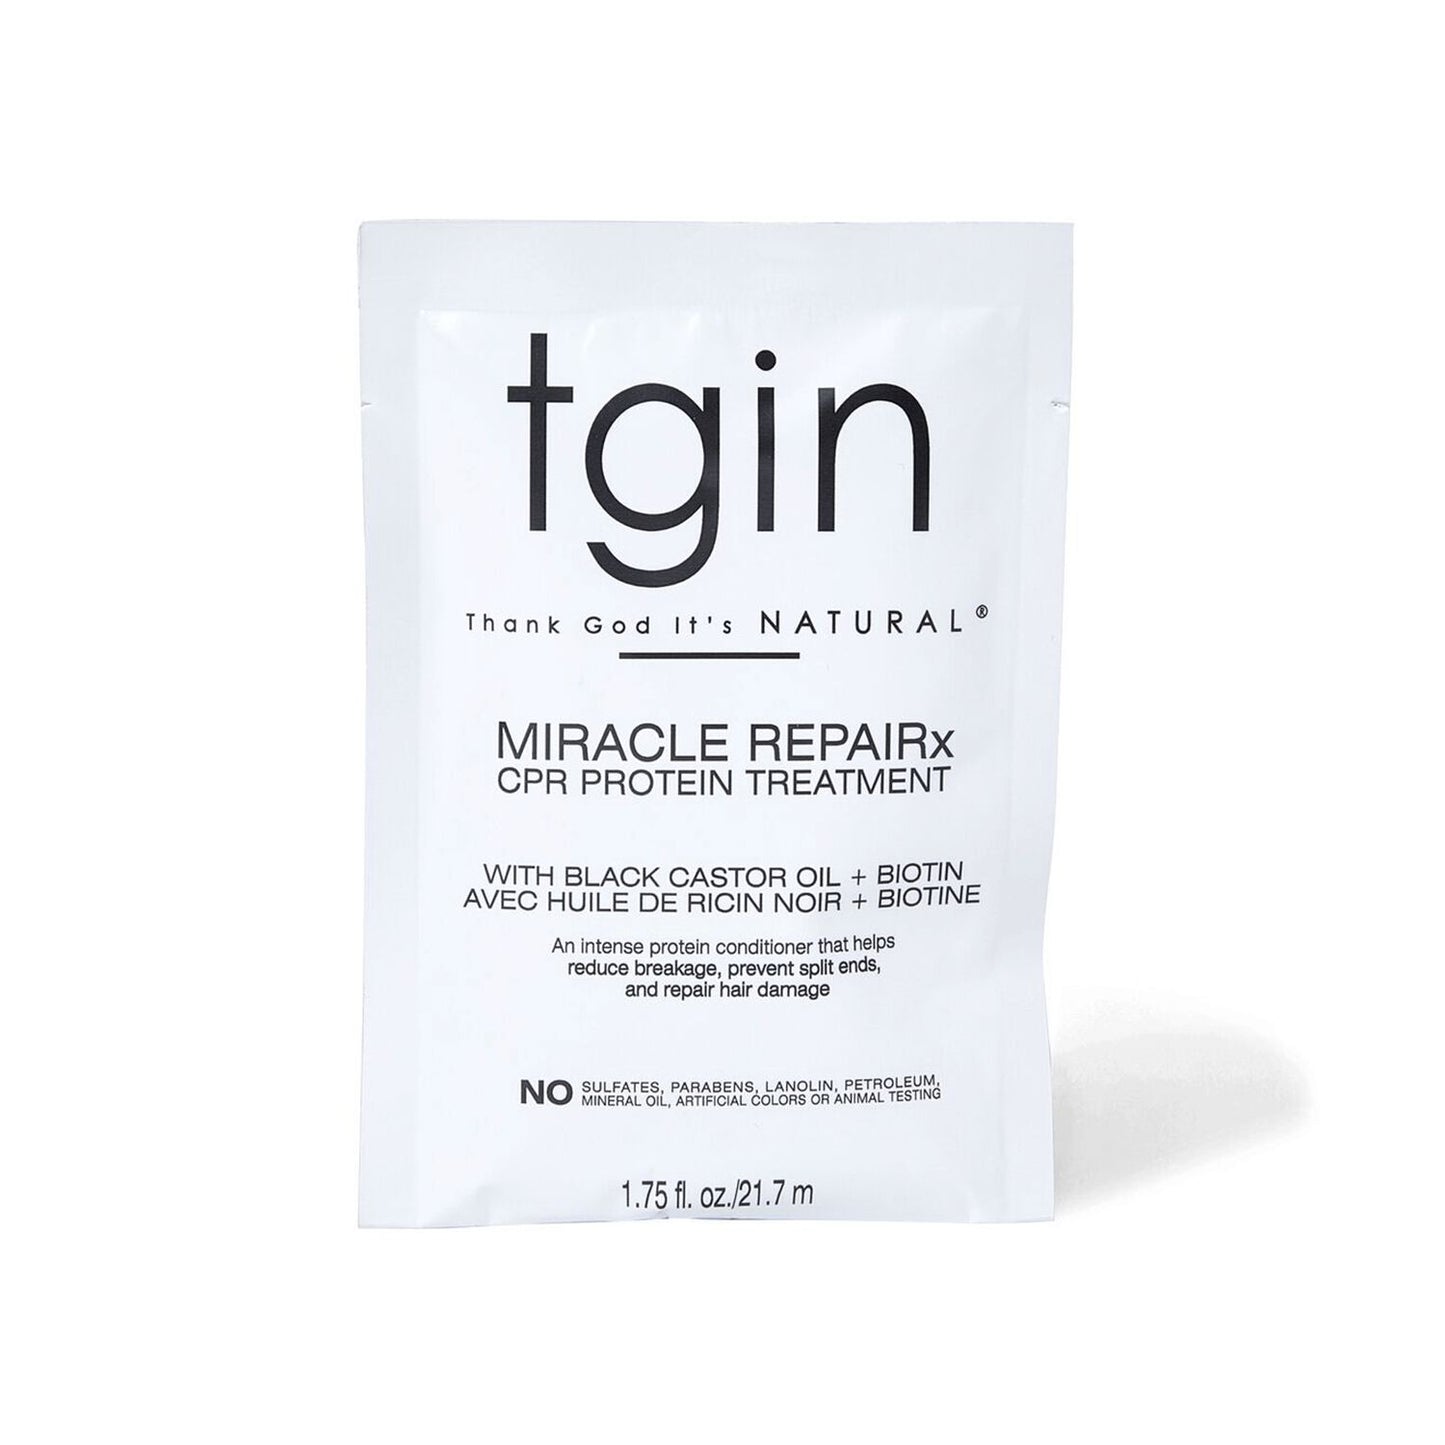 TGIN Miracle Repairx CPR Protein Treatment 12 Oz